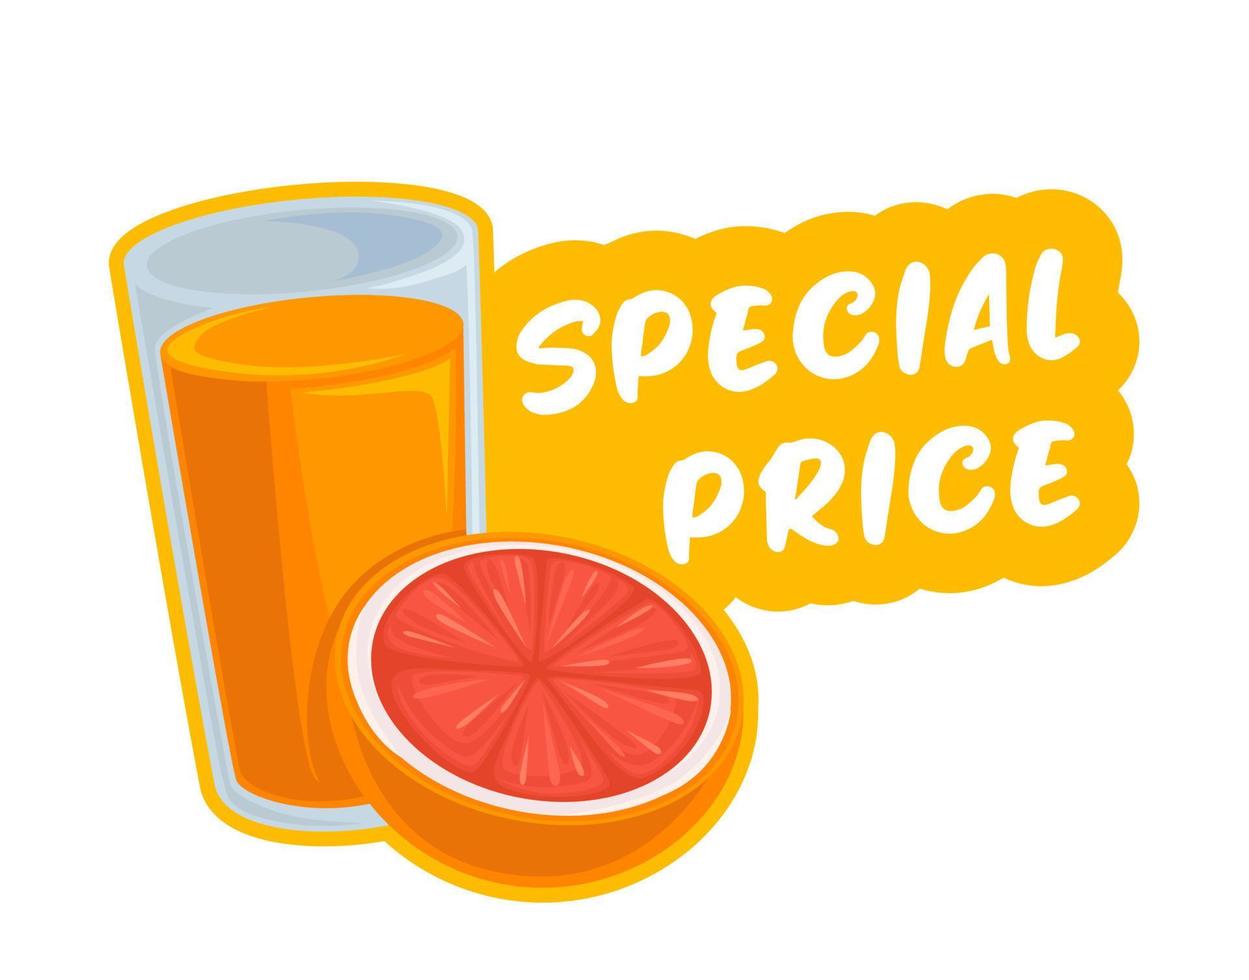 Special price on orange juice and grapefruits vector